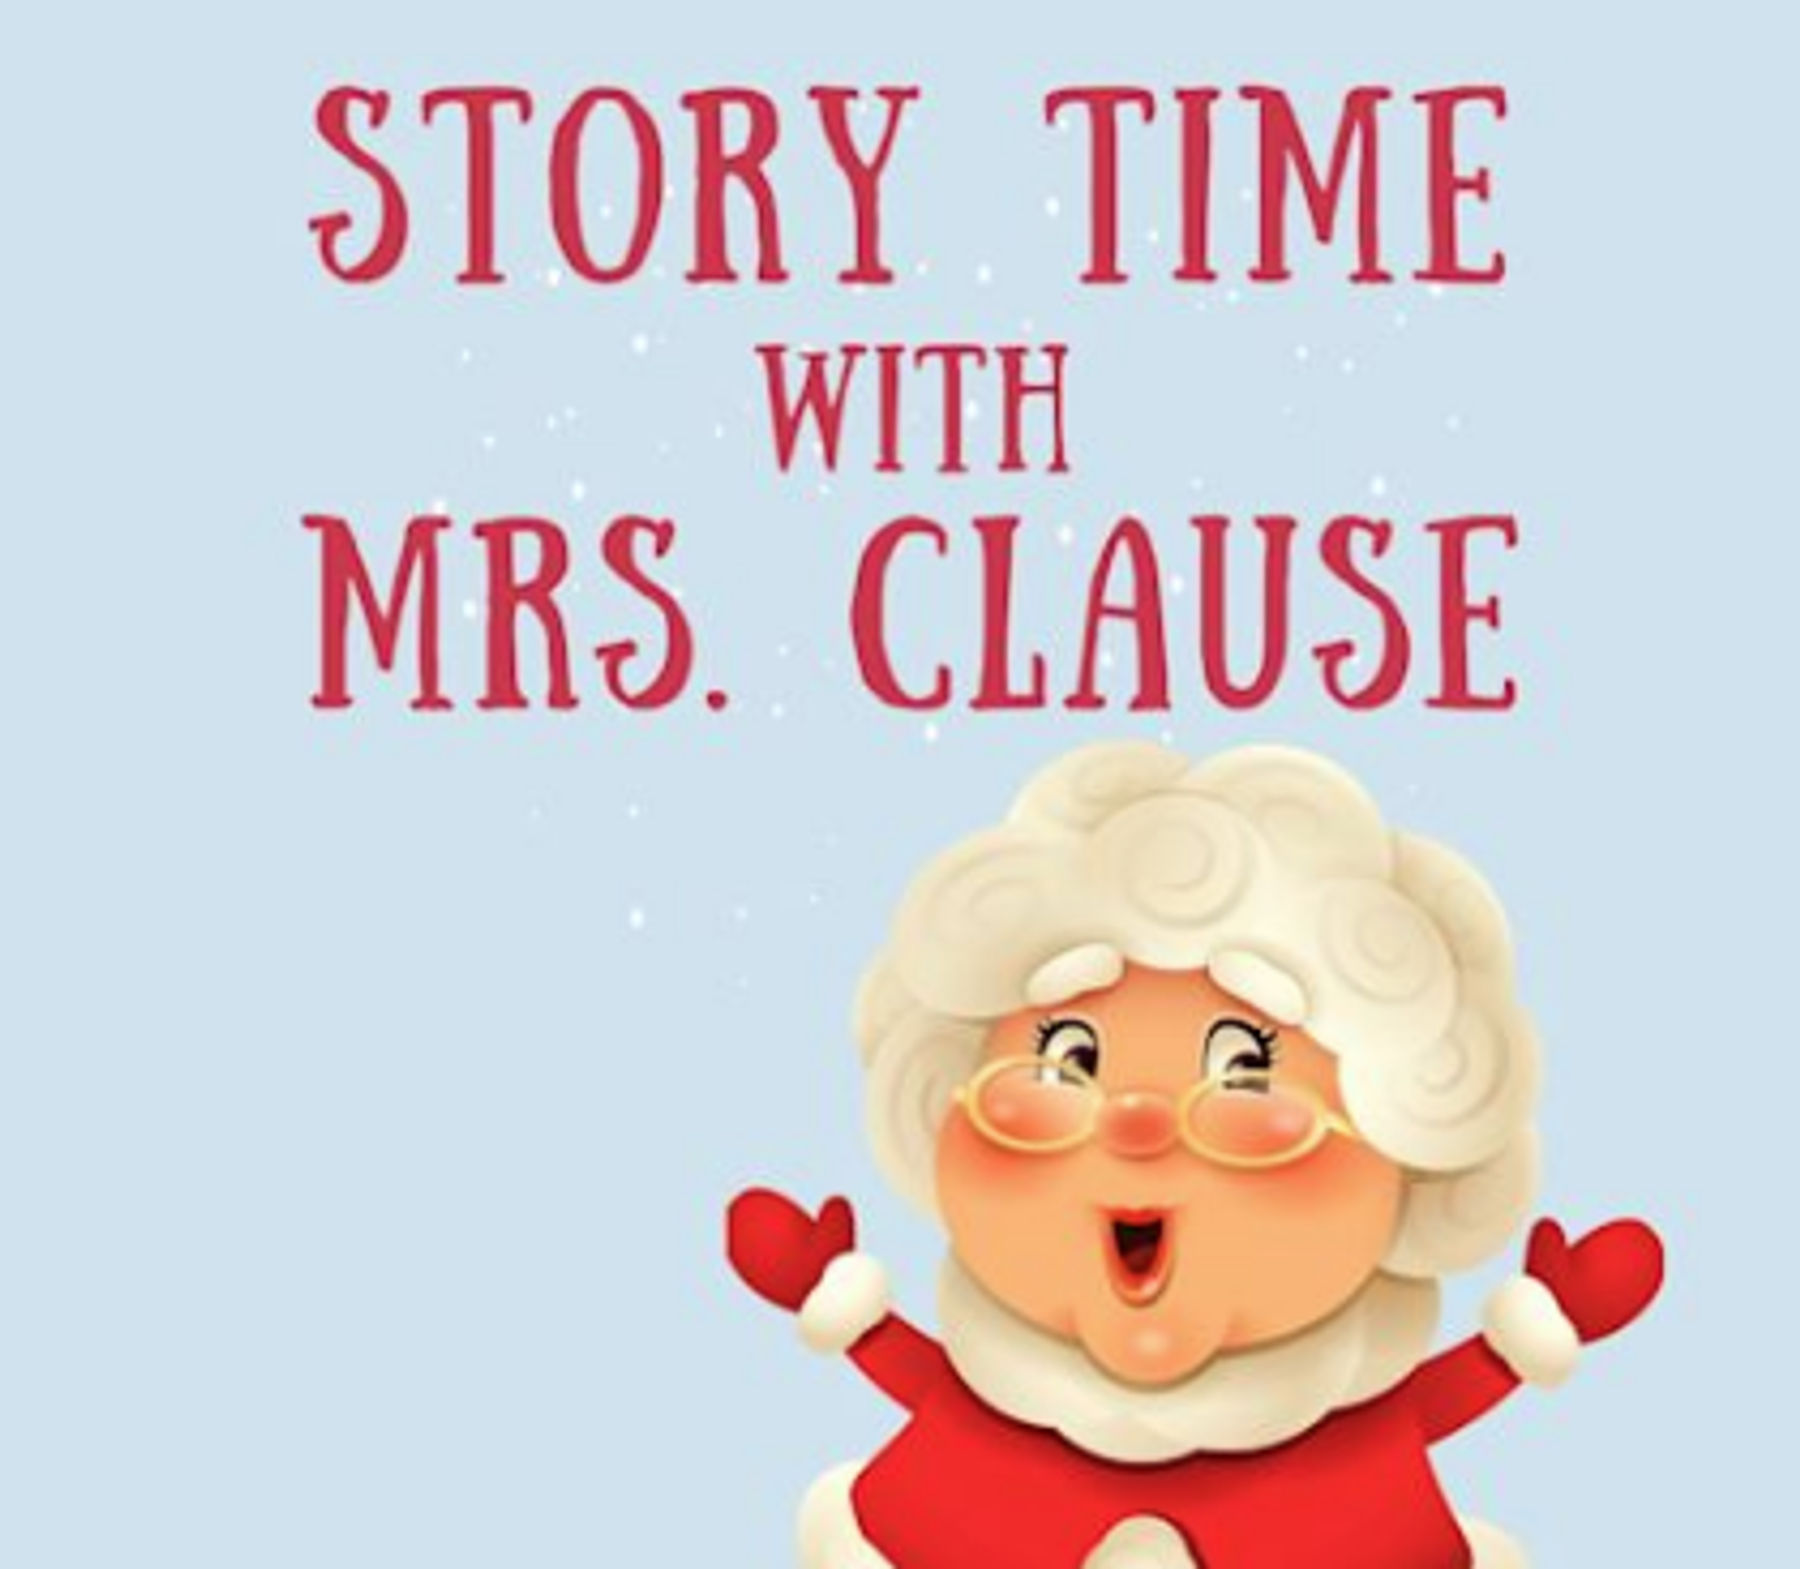 Story Time with Mrs. Clause!!!